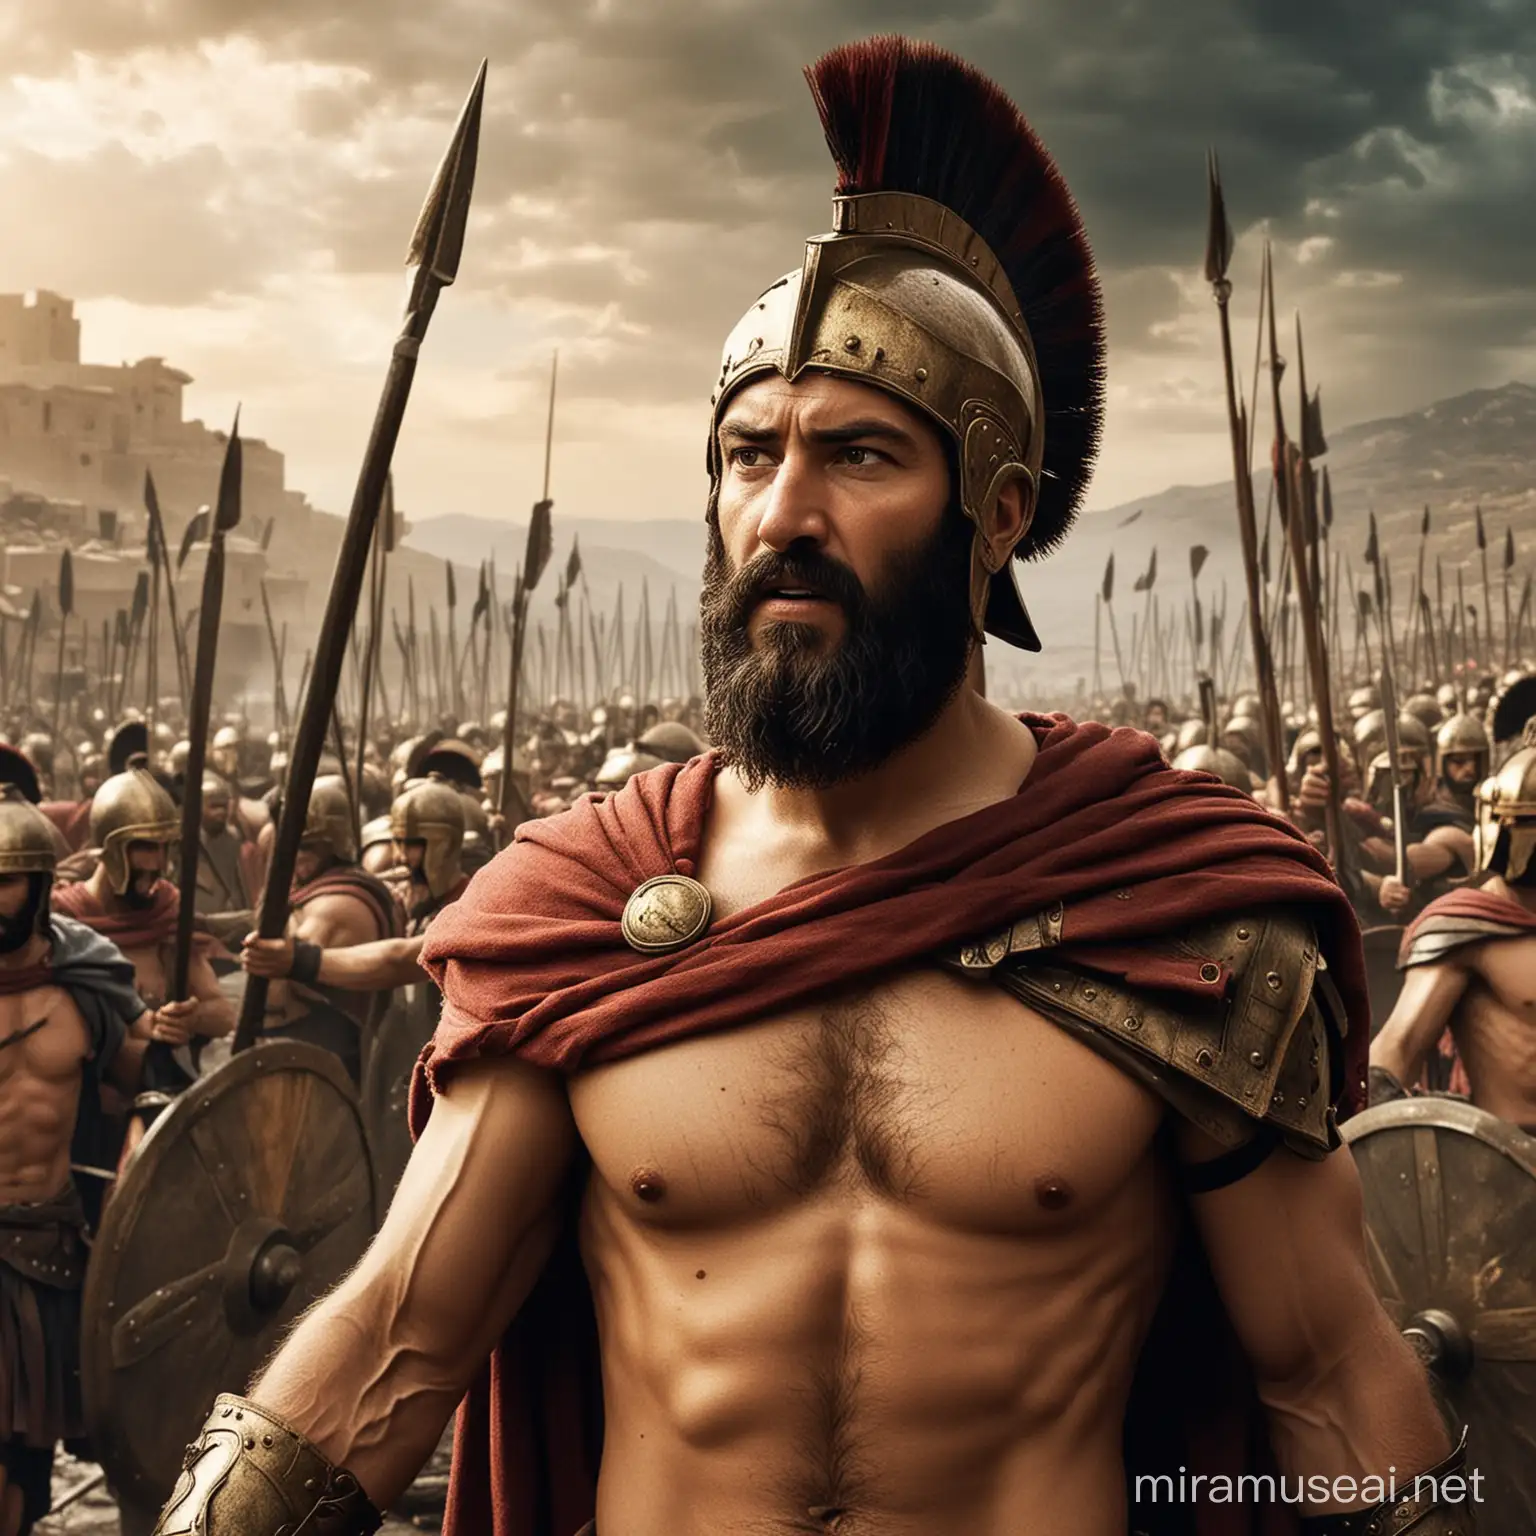 
King Leonidas who is the leader of Spartans leading his troops.
